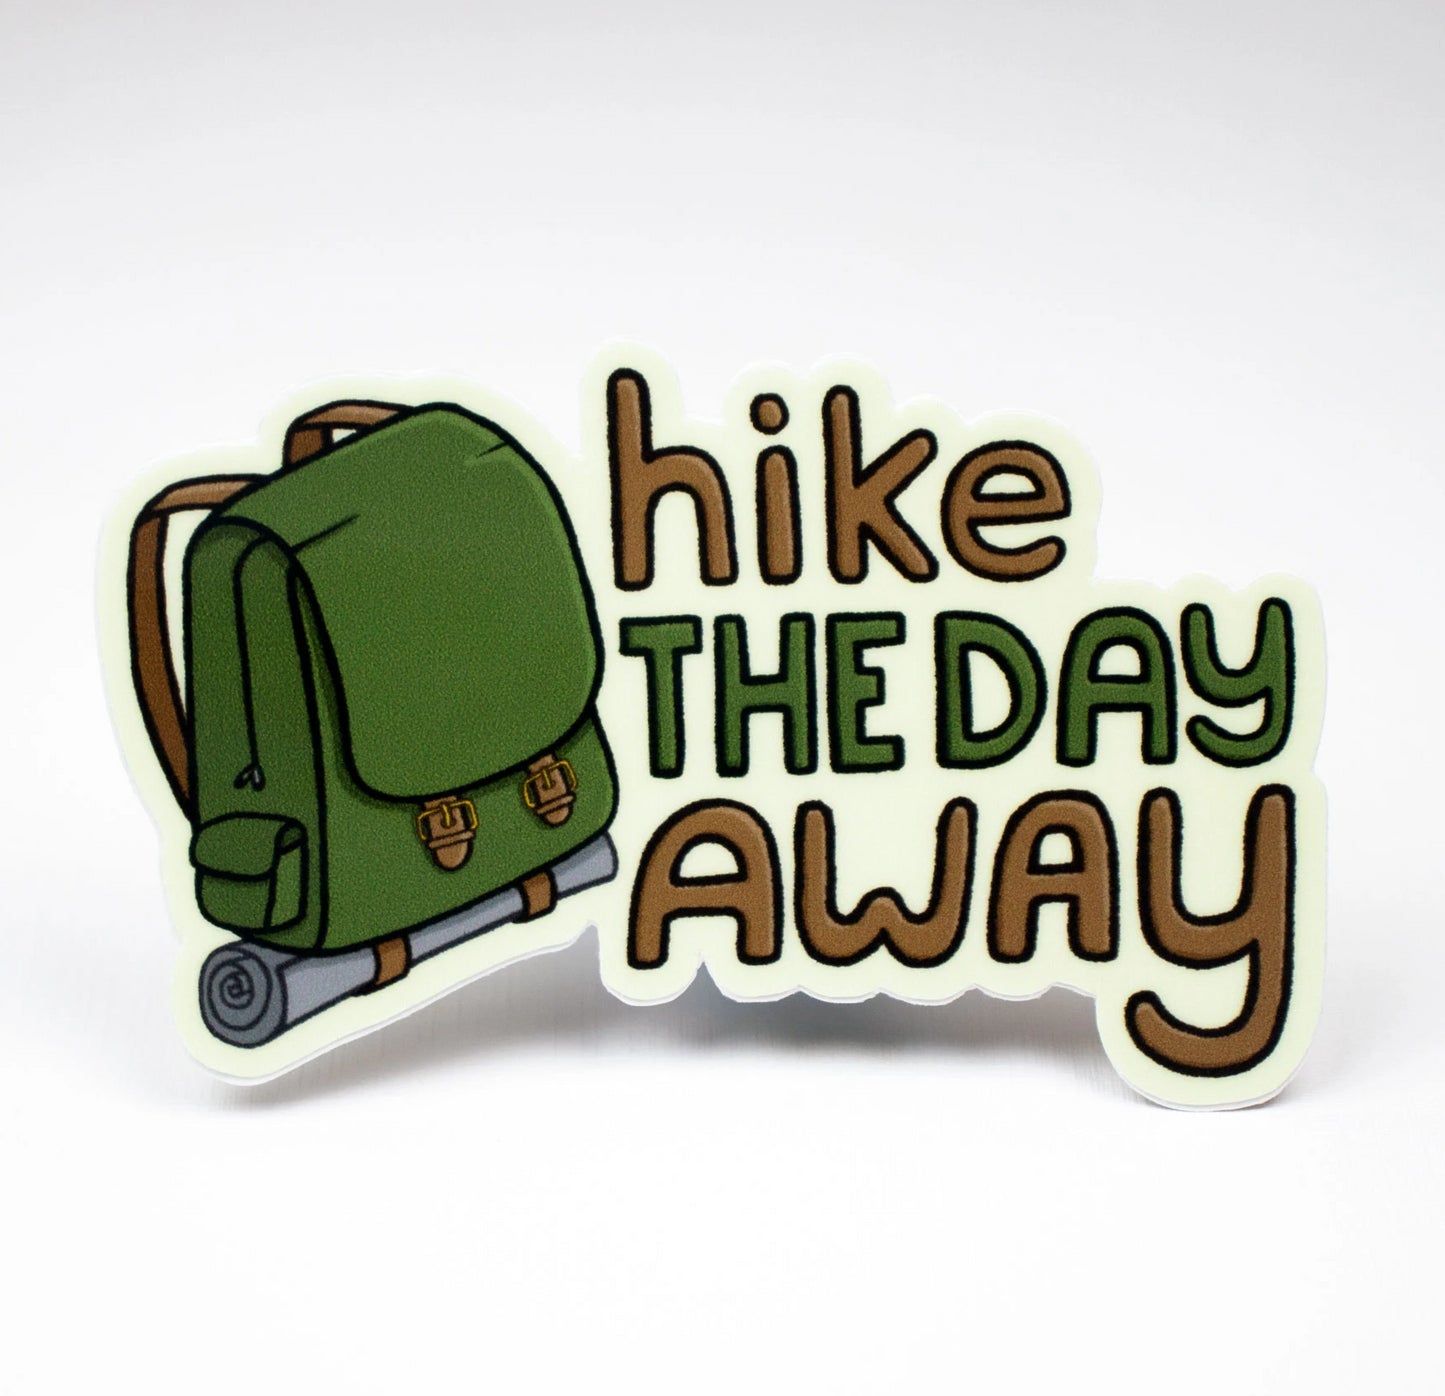 Hike the Day Away Sticker